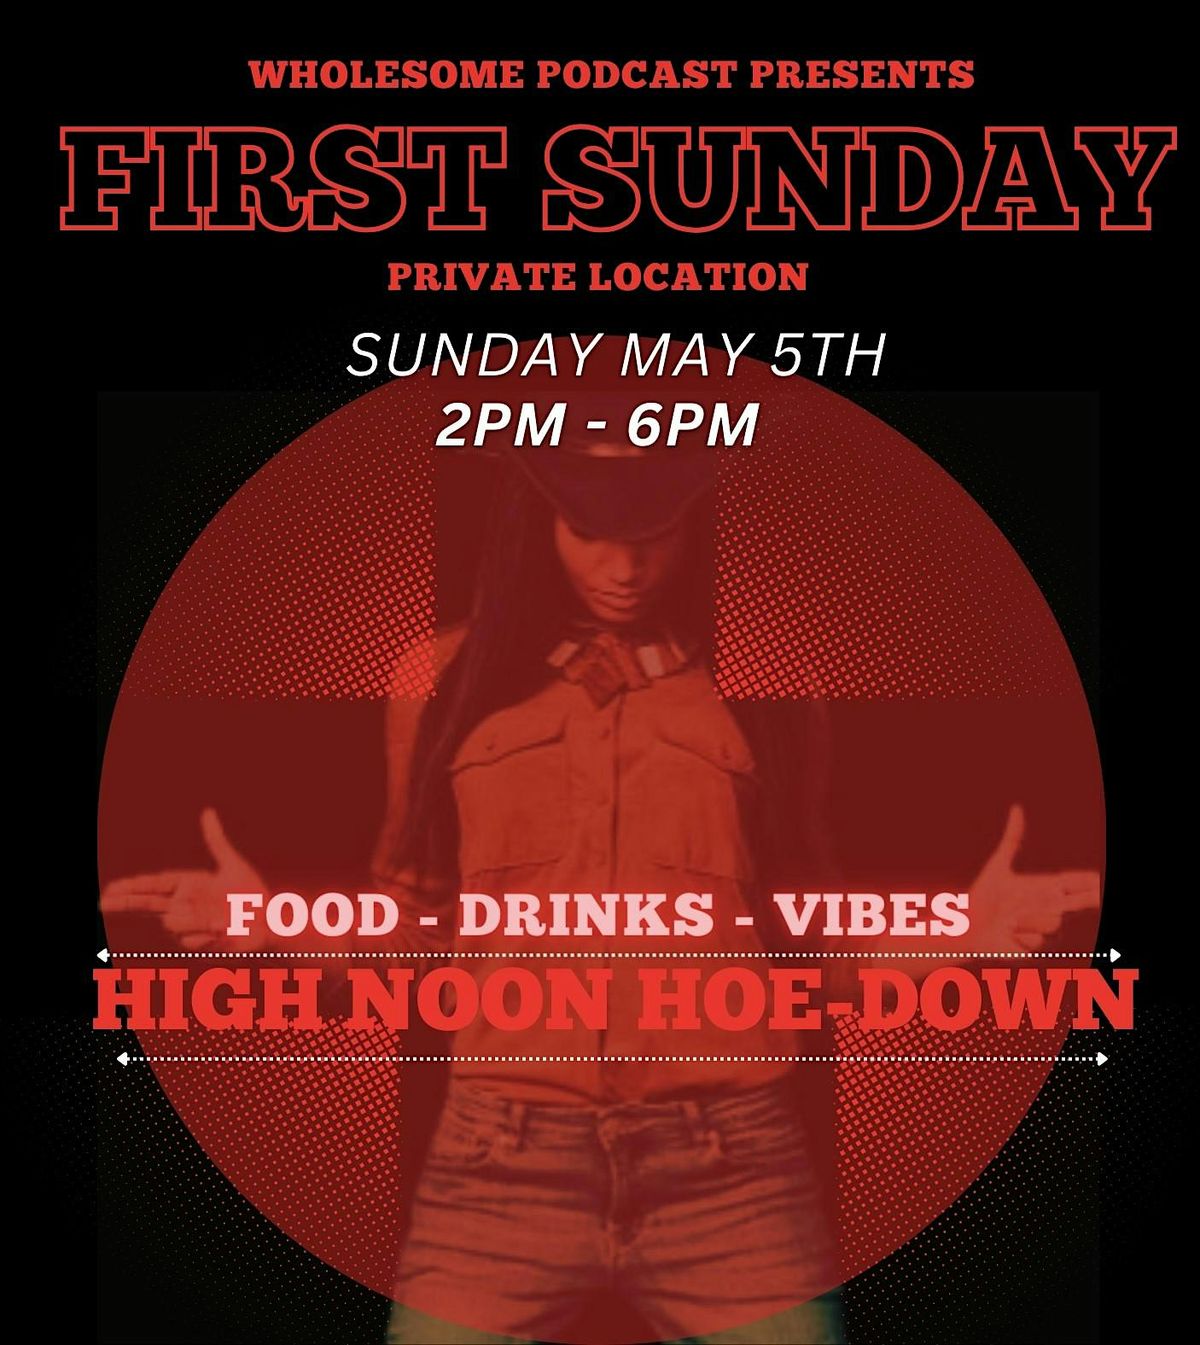 First Sunday - The High Noon Ho-Down Brunch